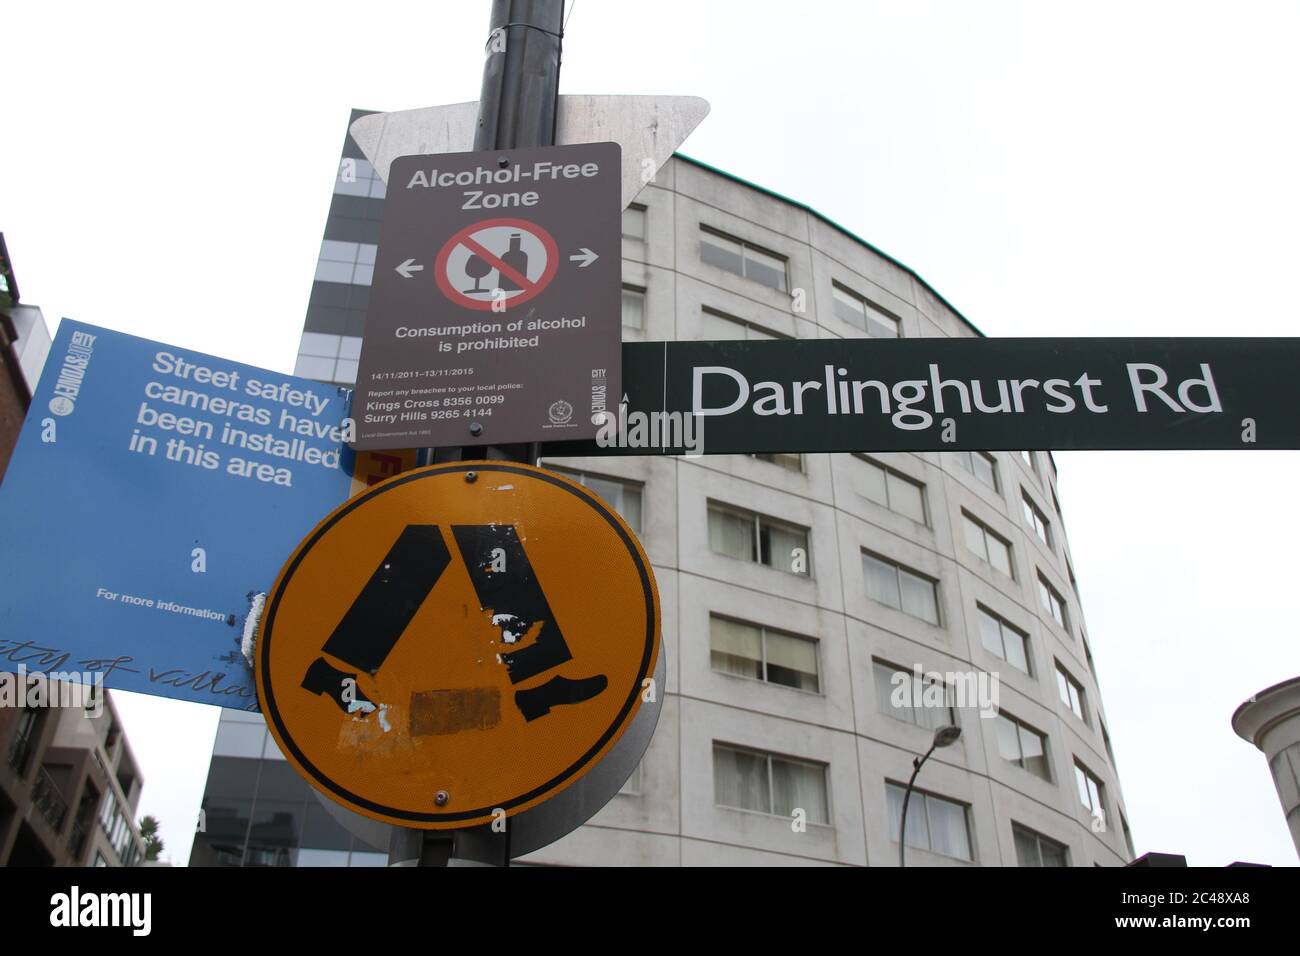 Street cameras and an alcohol free zone are two strategies adopted to deal with the problems in Darlinghurst Road, Kings Cross. Stock Photo